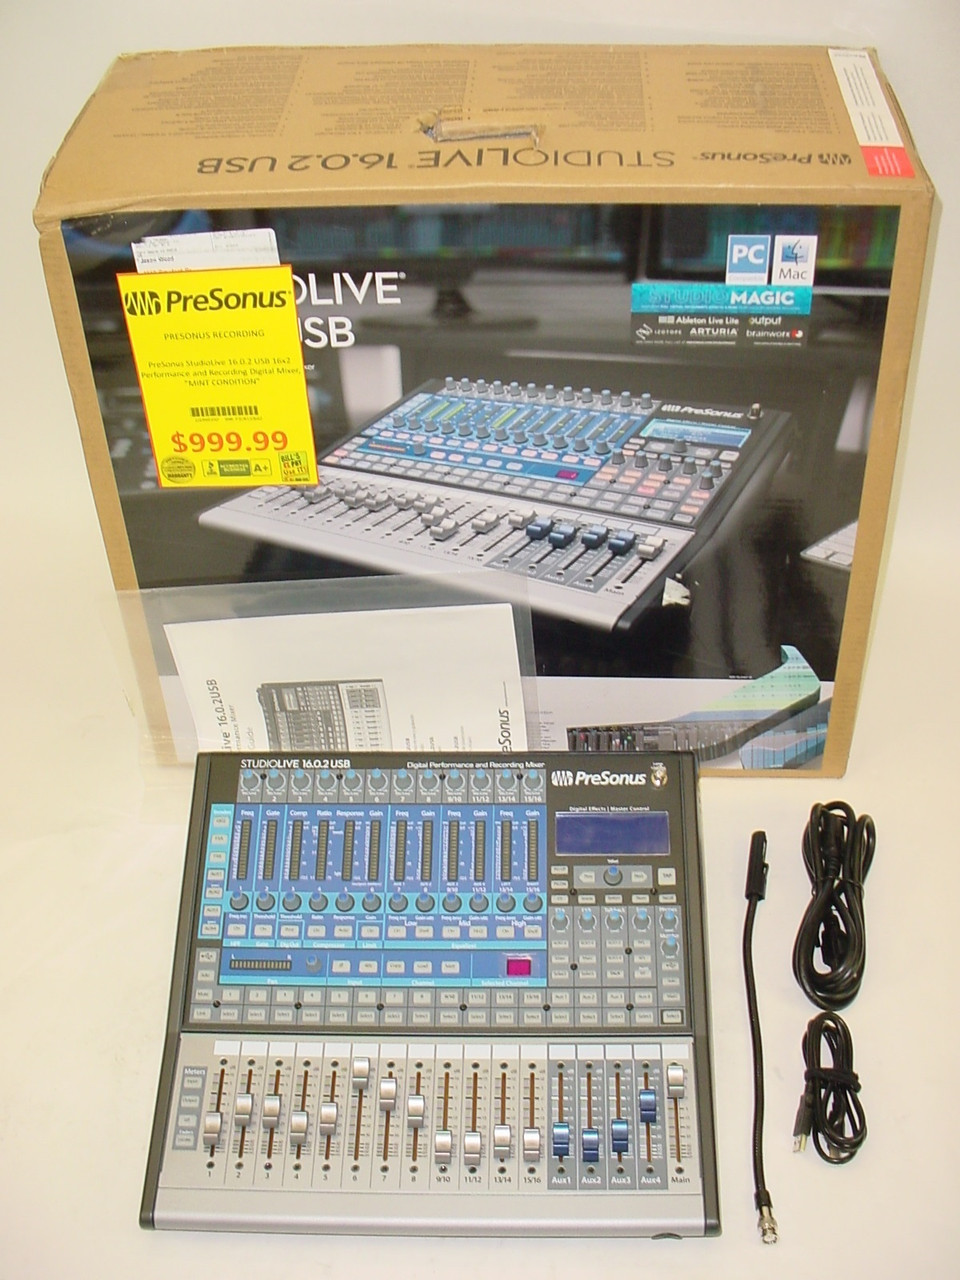 StudioLive 16.0.2 USB 16-channel Digital Mixer - Previously Owned - Bill's